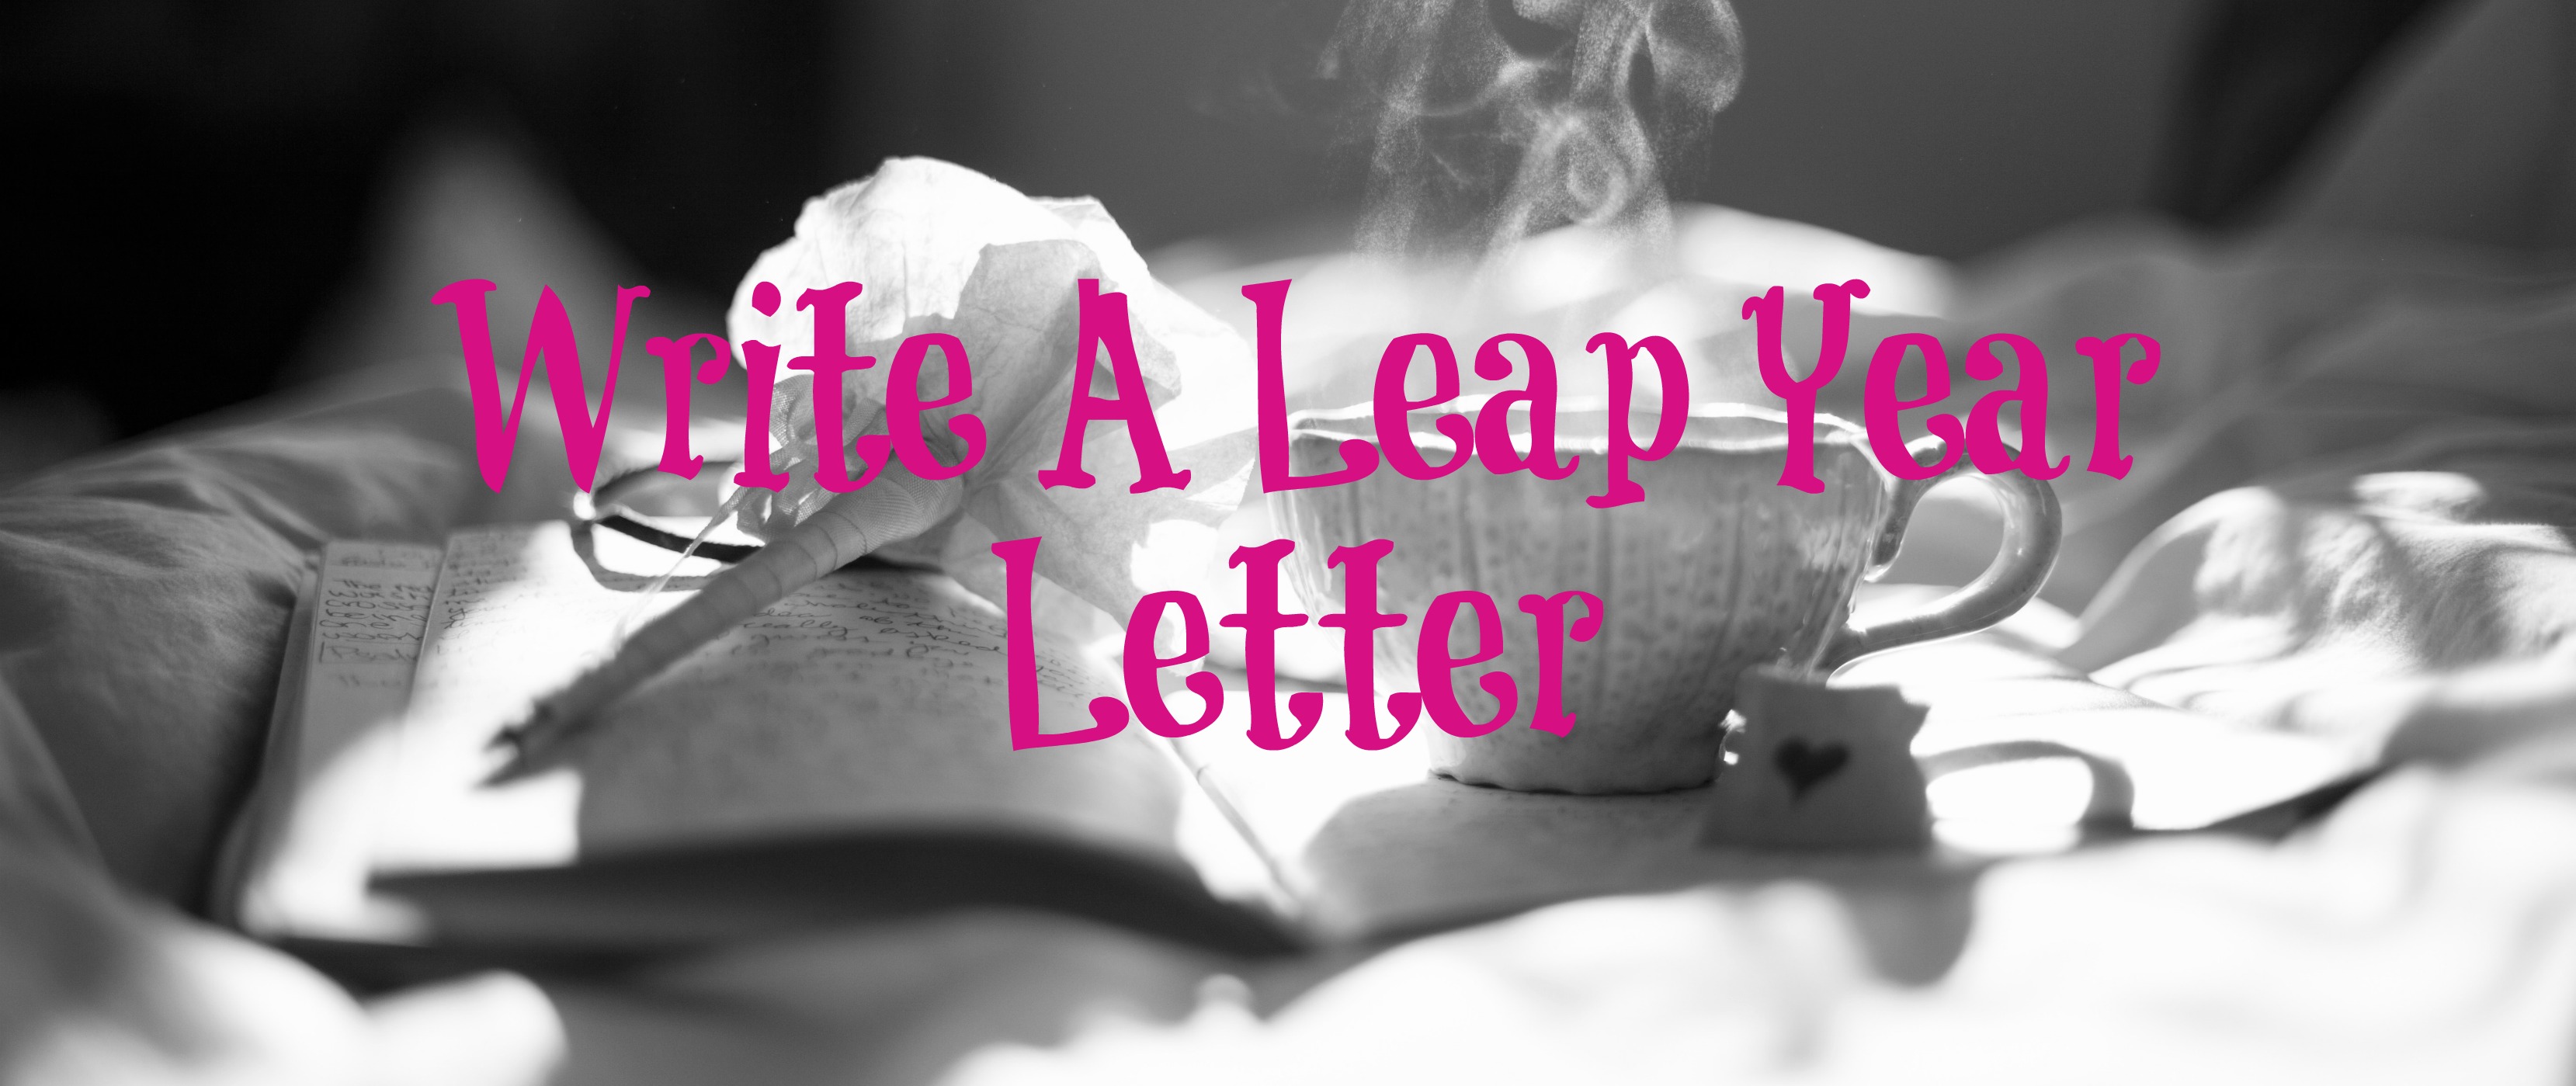 Write a Leap Year Letter